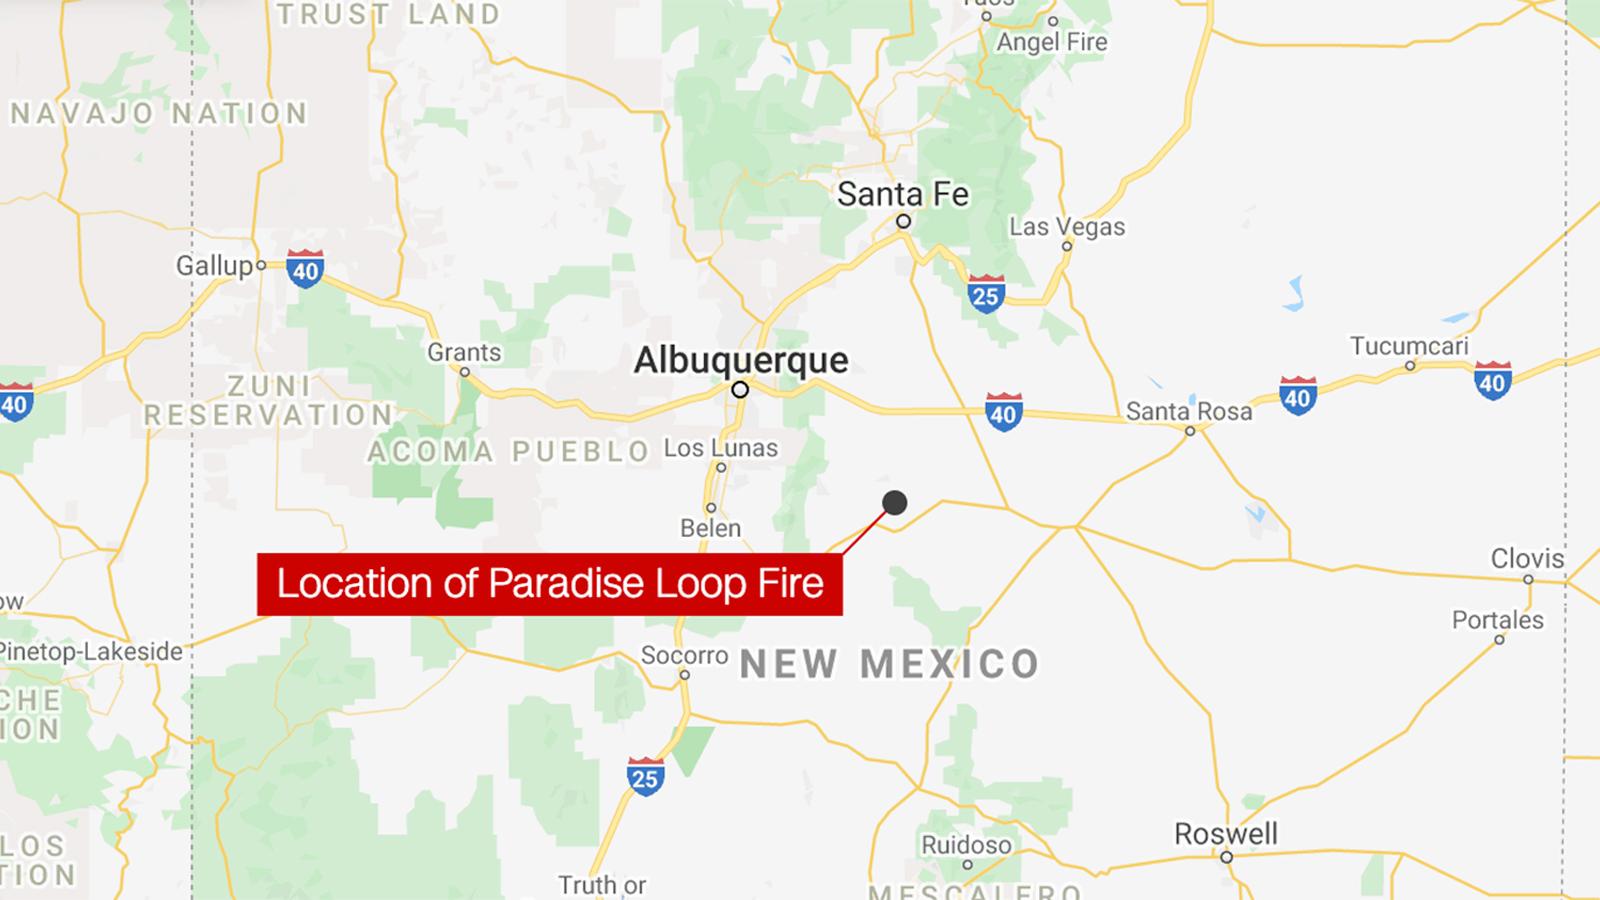 New Mexico wildfire evacuation orders lifted - CNN